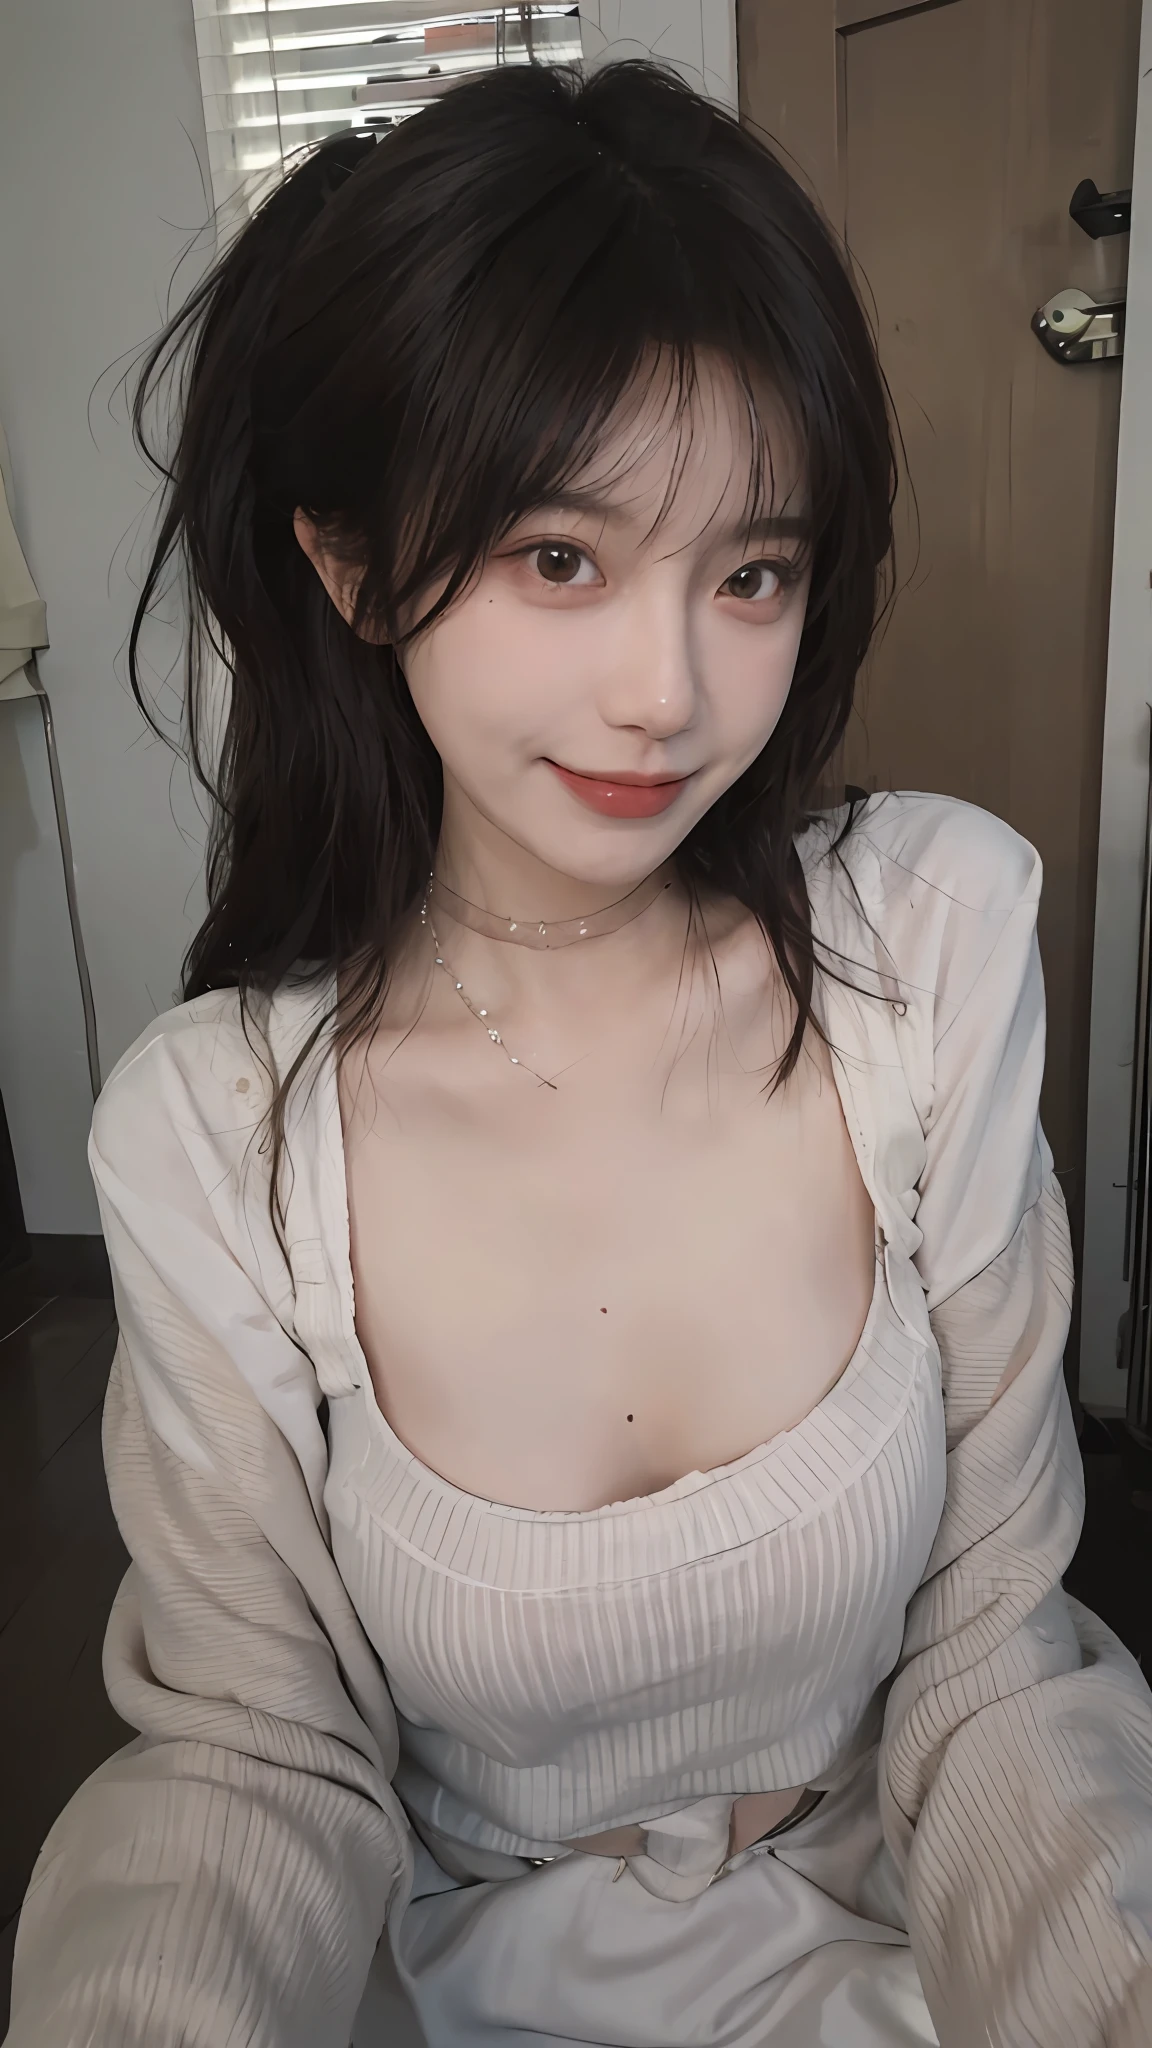 best qualtiy， Ultra-high resolution， （realisticlying：1.4），cute hairpin，Baoyu Girl，1girll, Beautiful woman with a slim figure:1.4, abs:1.1, (A brown-haired, mideum breasts:1.3), Long pink sweater:1.1, bathroom,Ultra-fine face，Elaborate Eyes，double eyelid，ssmile，choker necklace